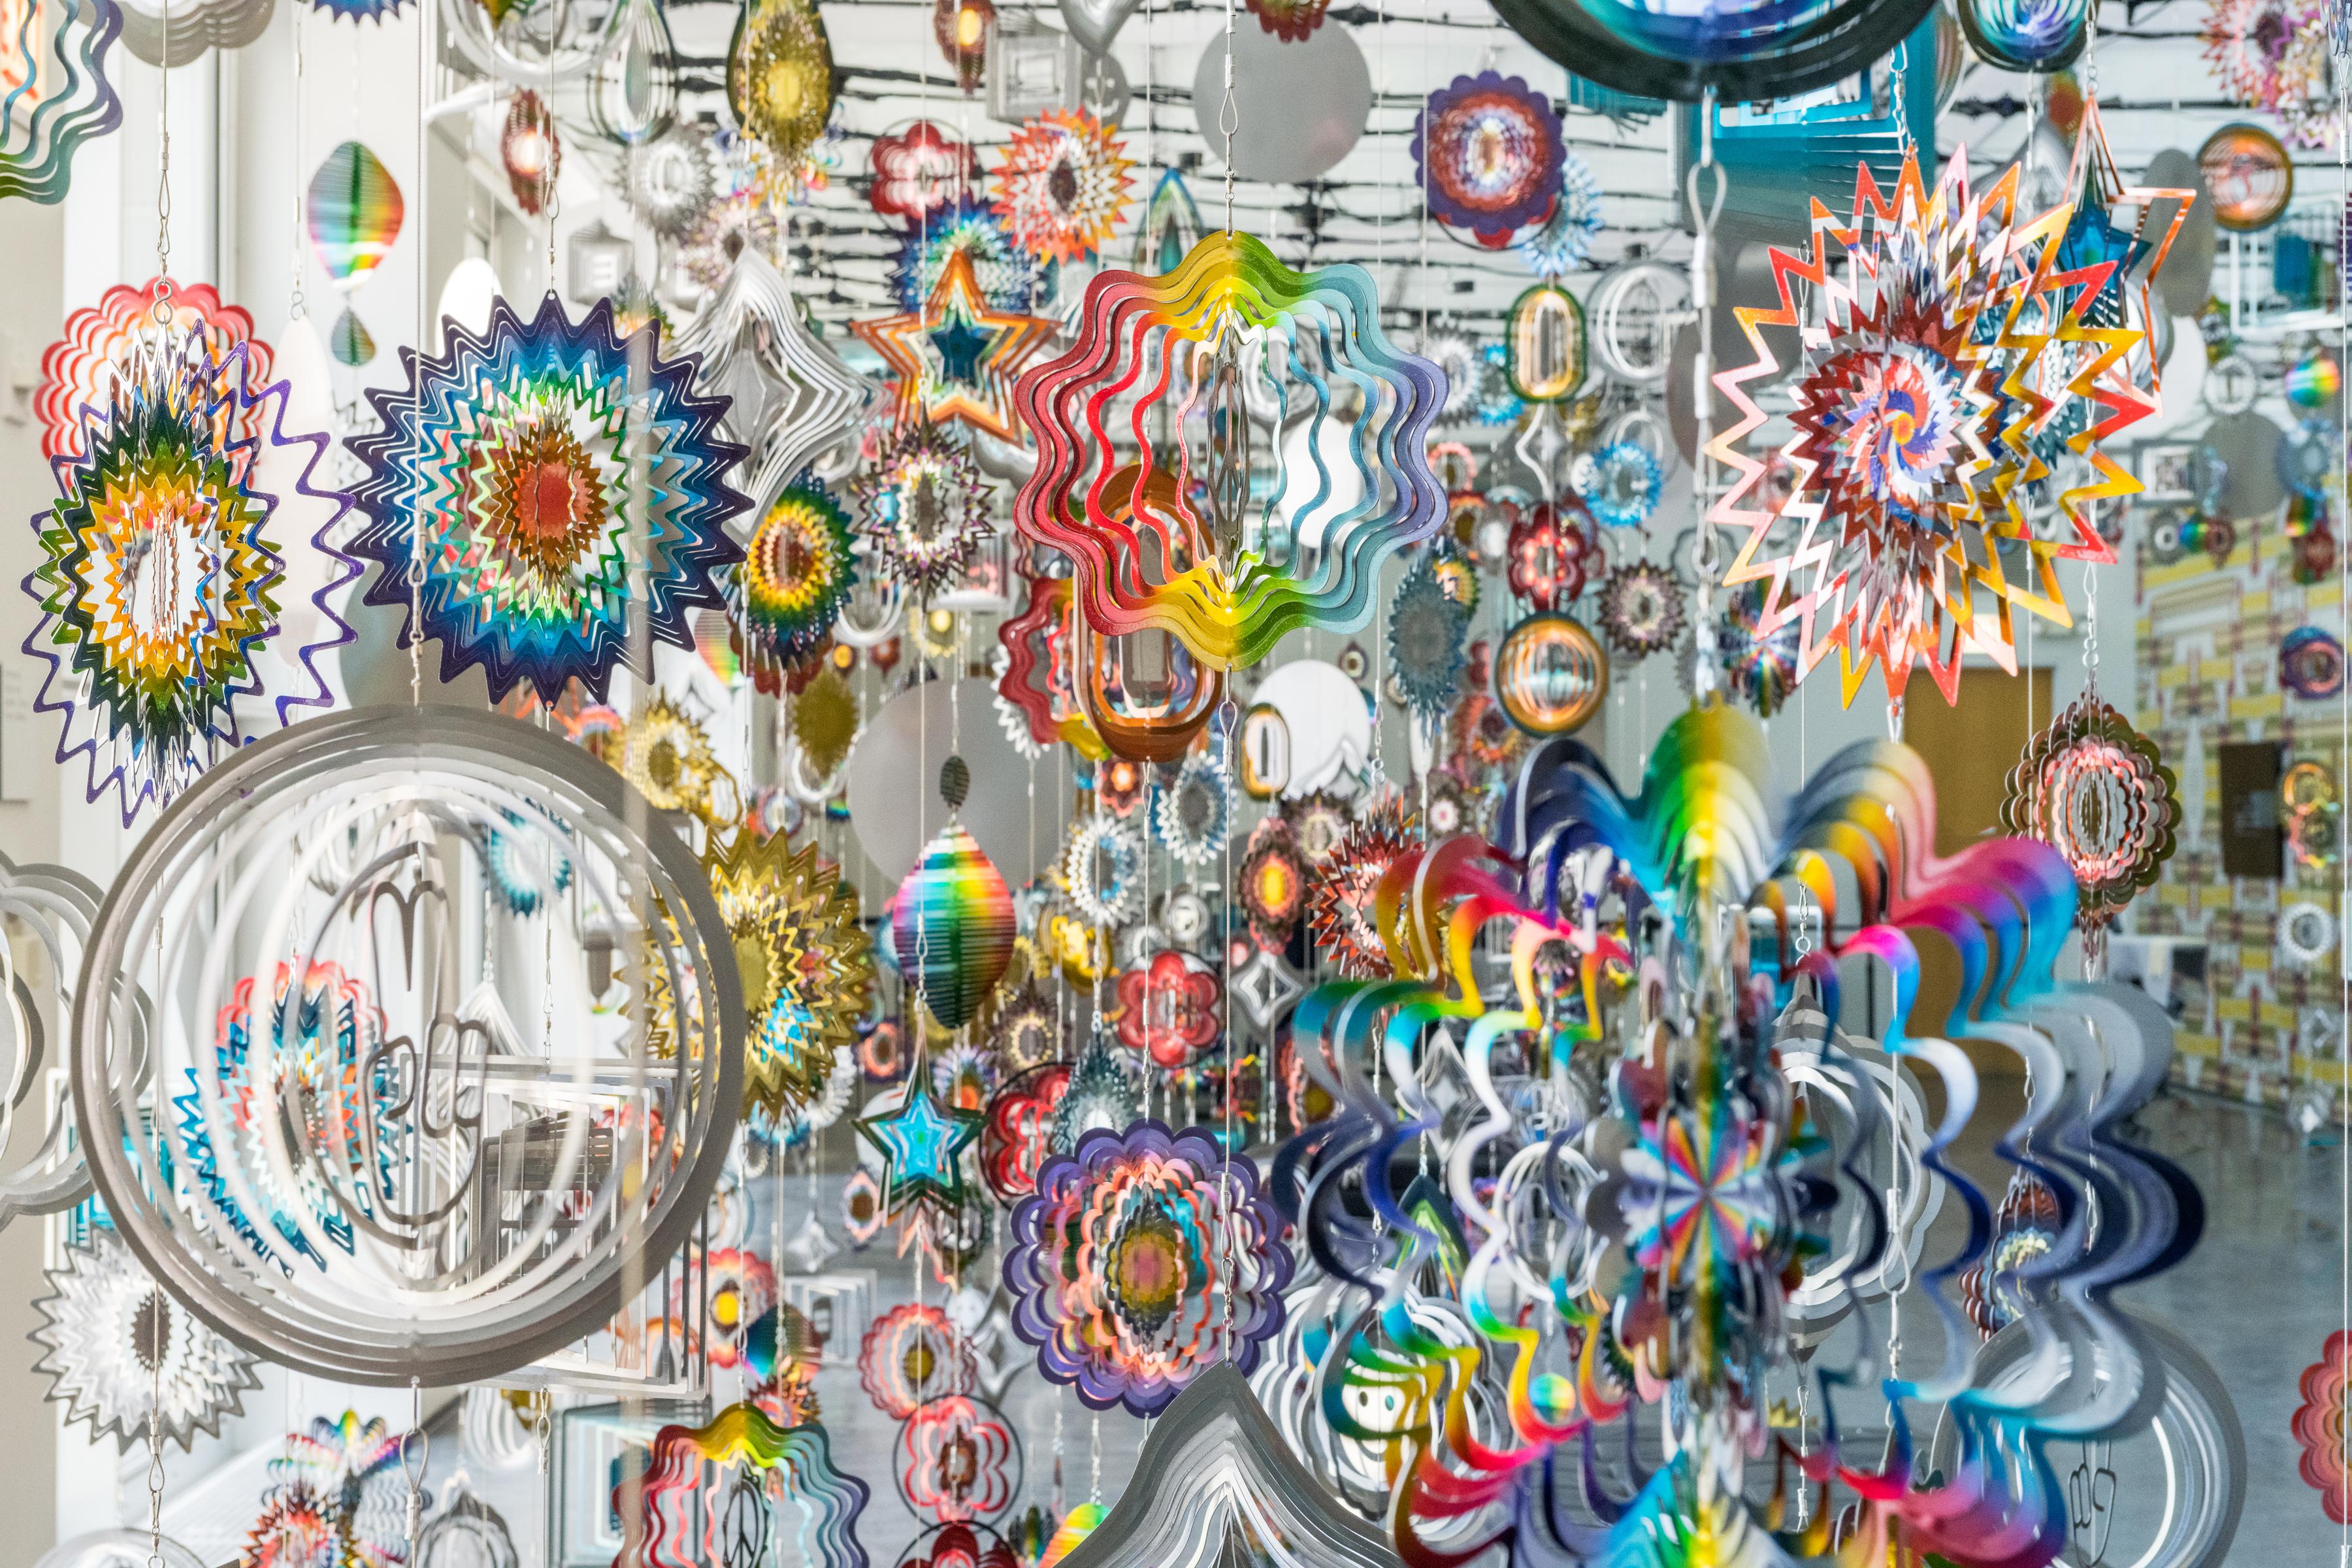 kinetic ornaments hang to form a tapestry of colorful shapes and patterns